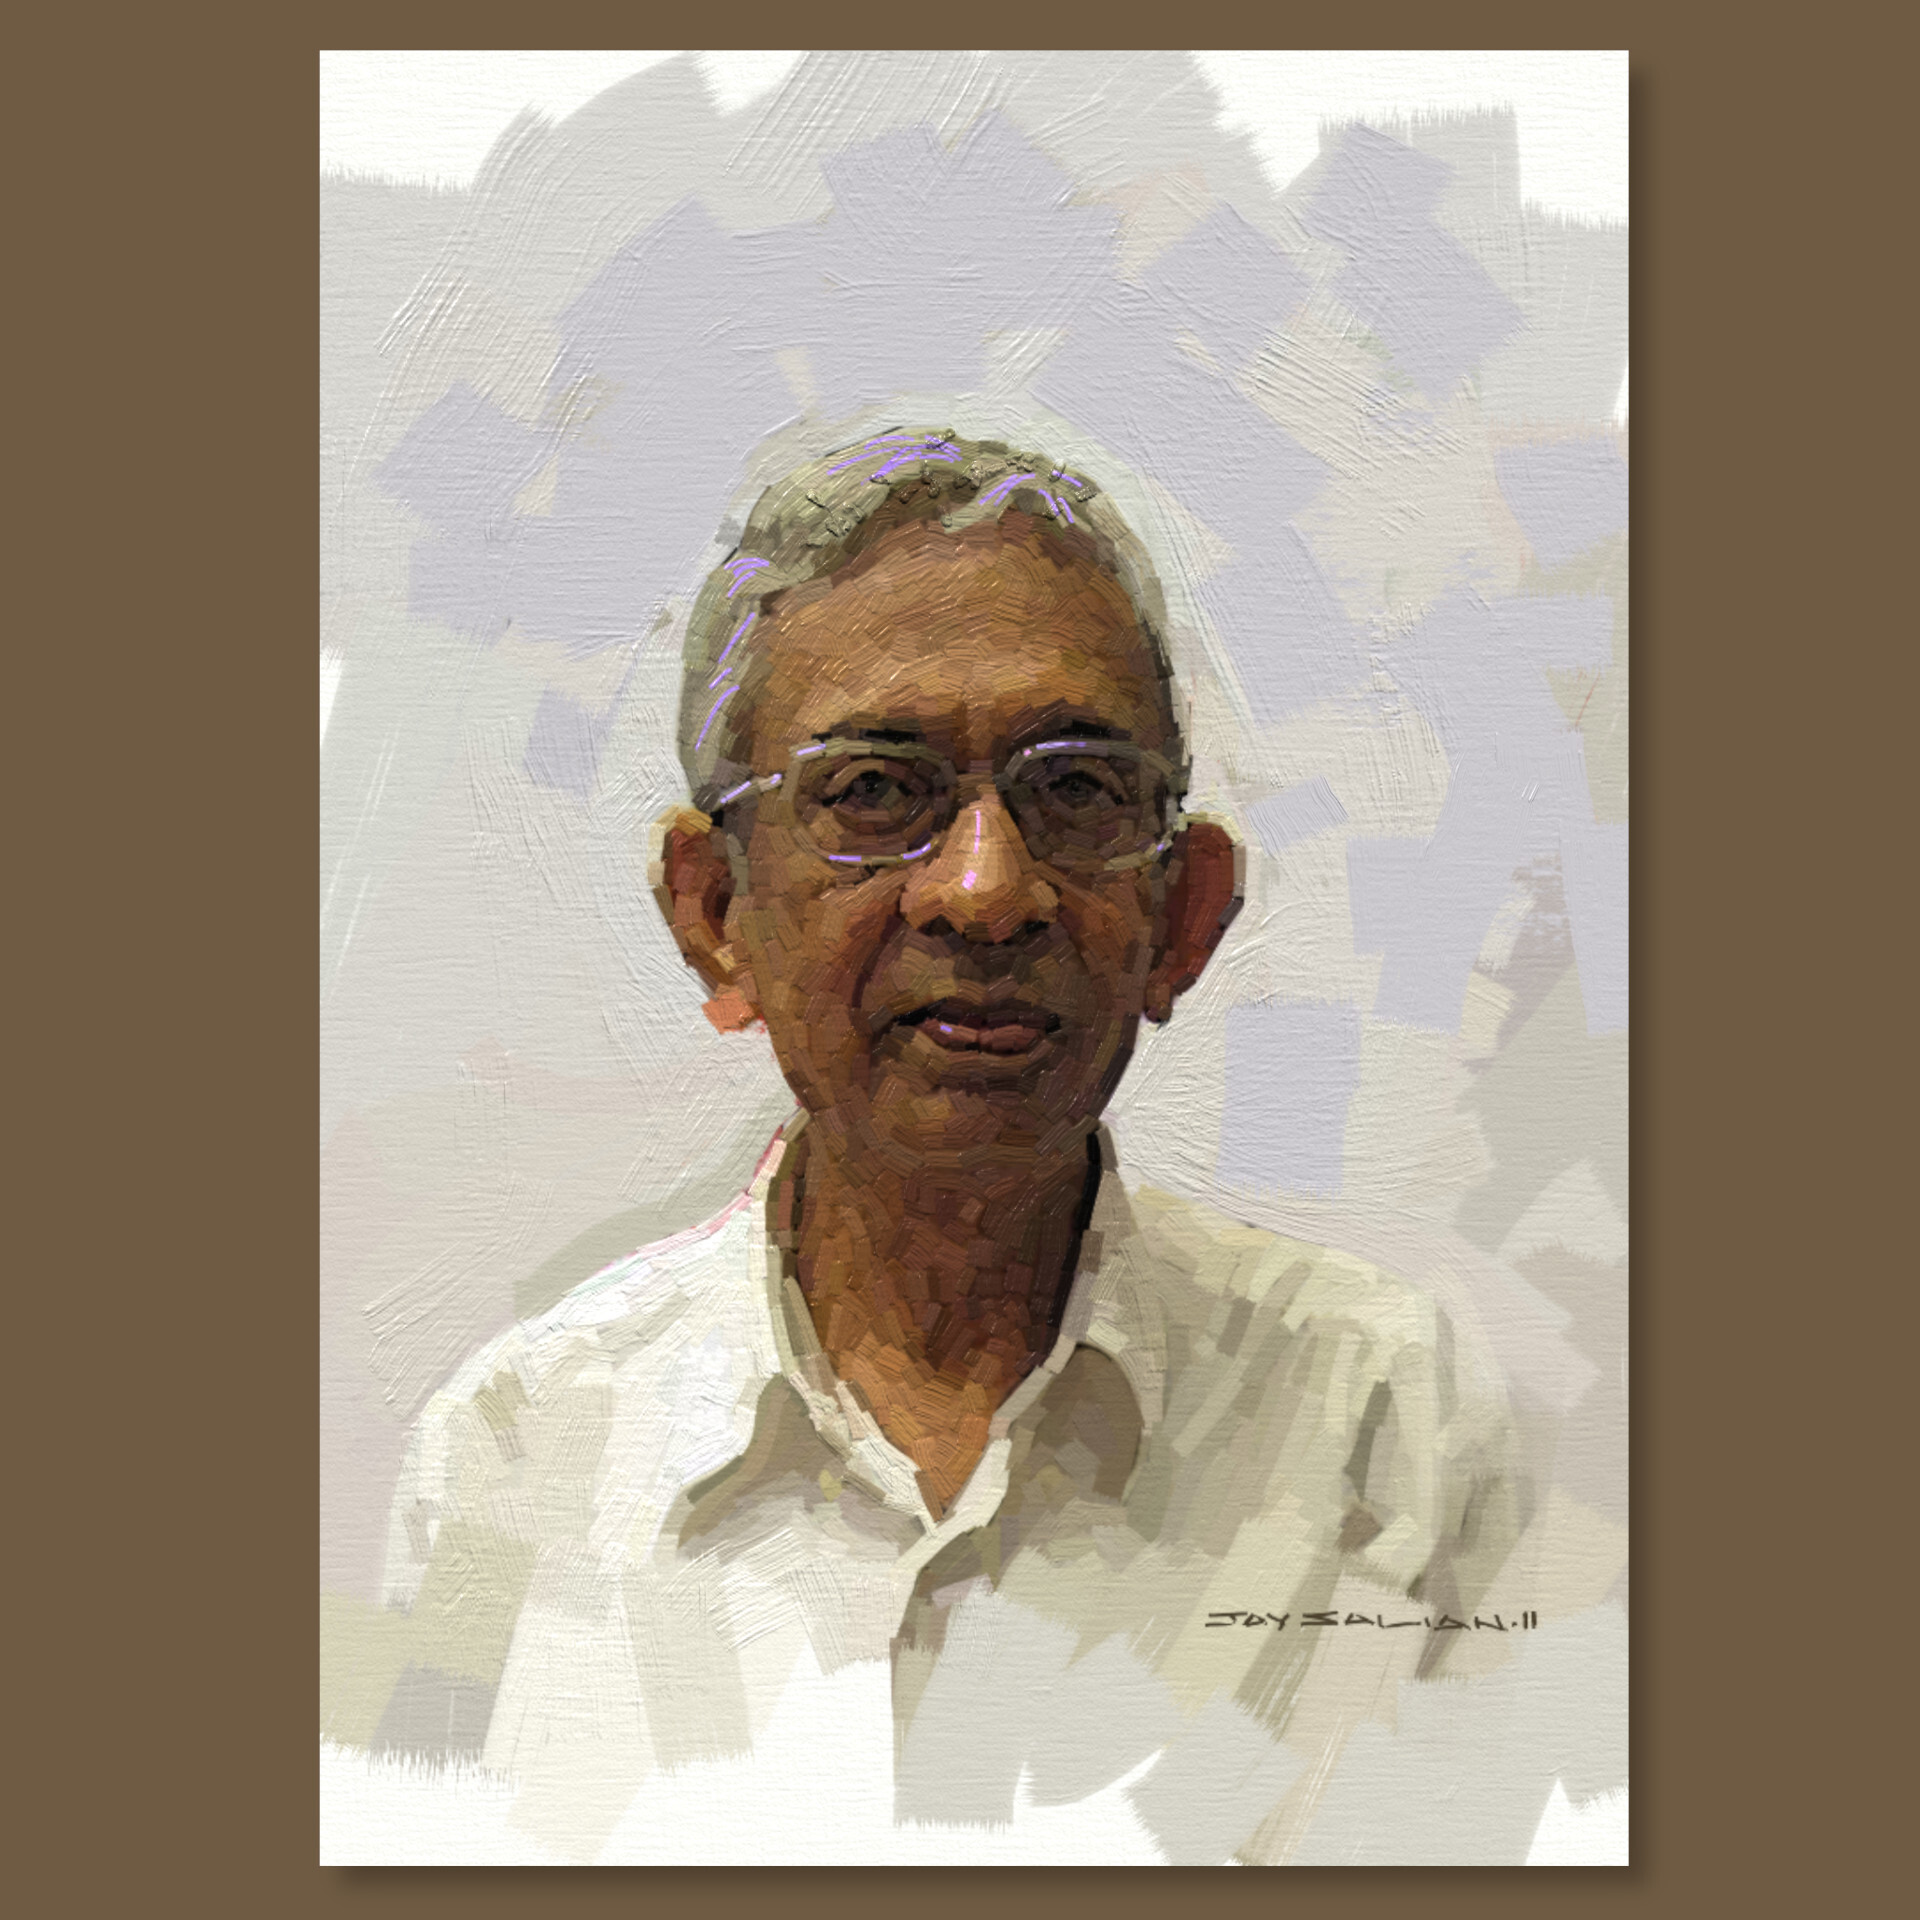 ArtStation - Ram Mohan - Father of Indian Animation